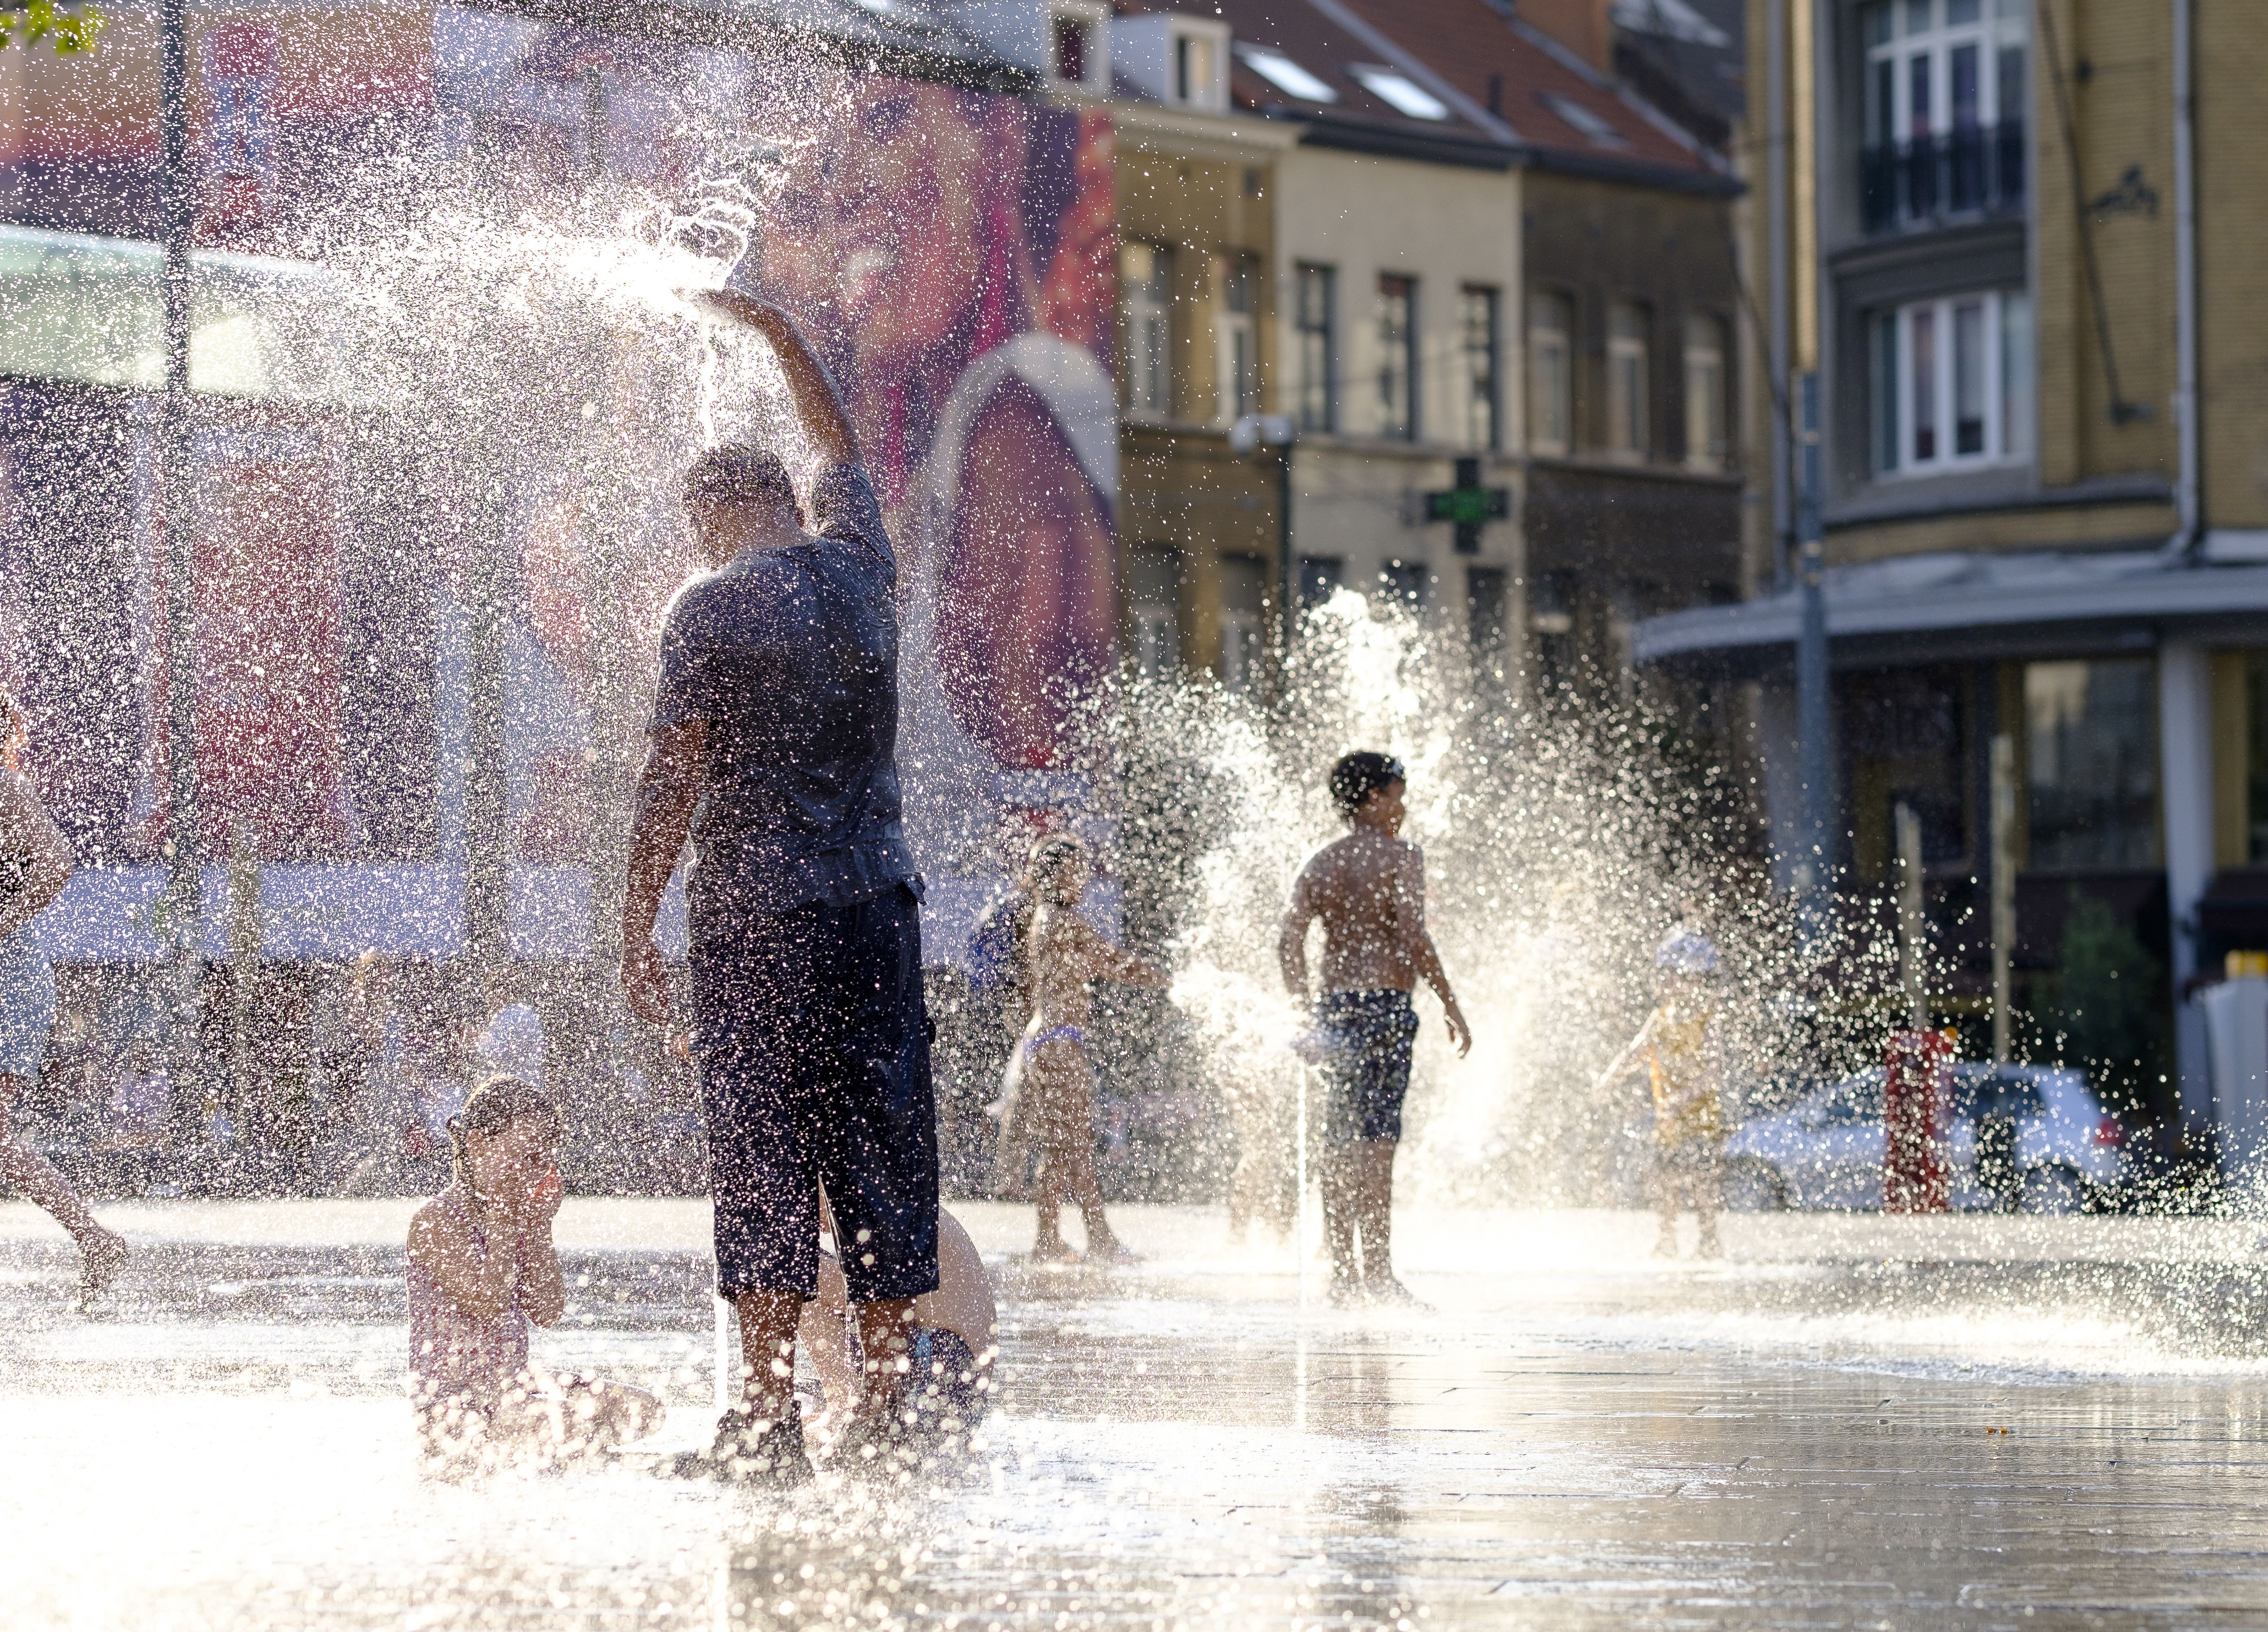  People cool off in the water of a fountain in Place Flagey, Brussels, Belgium